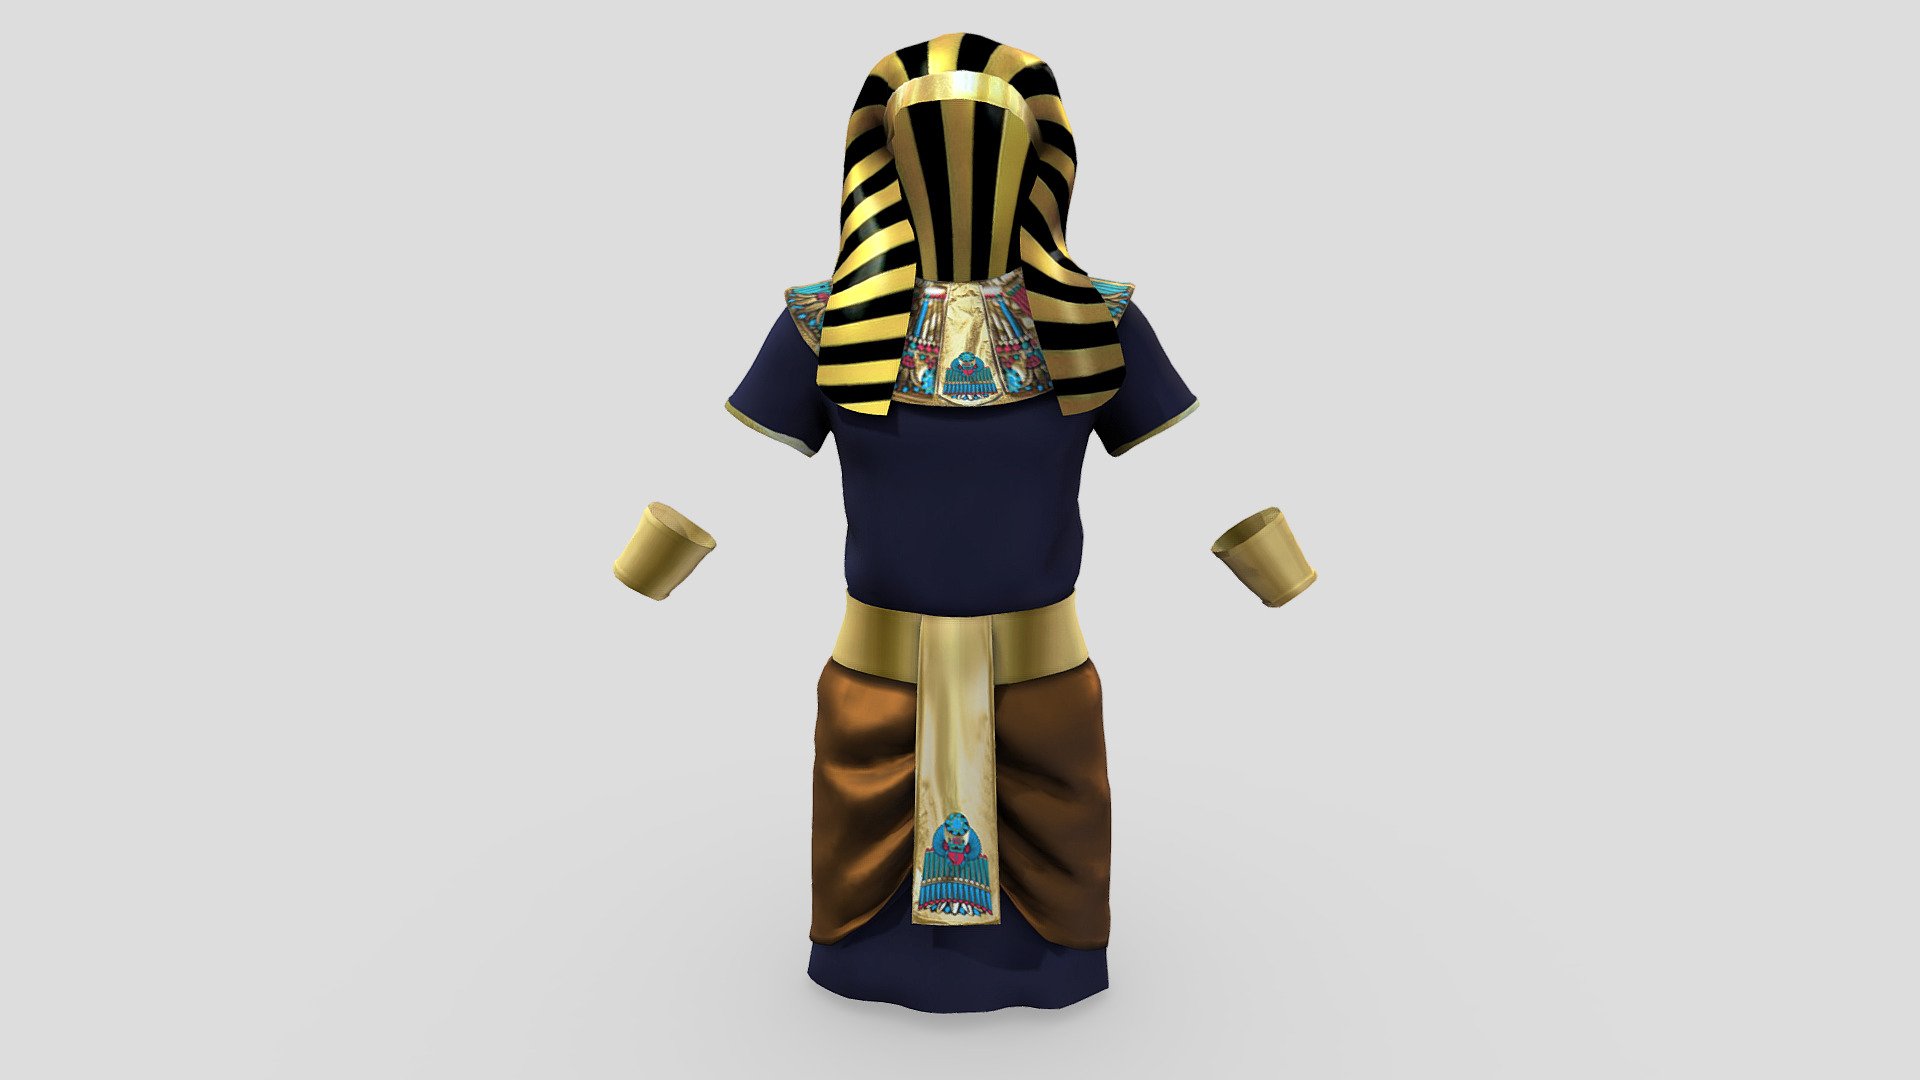 Dress + Headcover

Can fit to any character

Ready for games

Clean topology

No overlapping unwrapped UVs

High quality realistic textues

FBX, OBJ, gITF, USDZ (request other formats)

PBR or Classic

Please ask for any other questions

Type     user:3dia &ldquo;search term